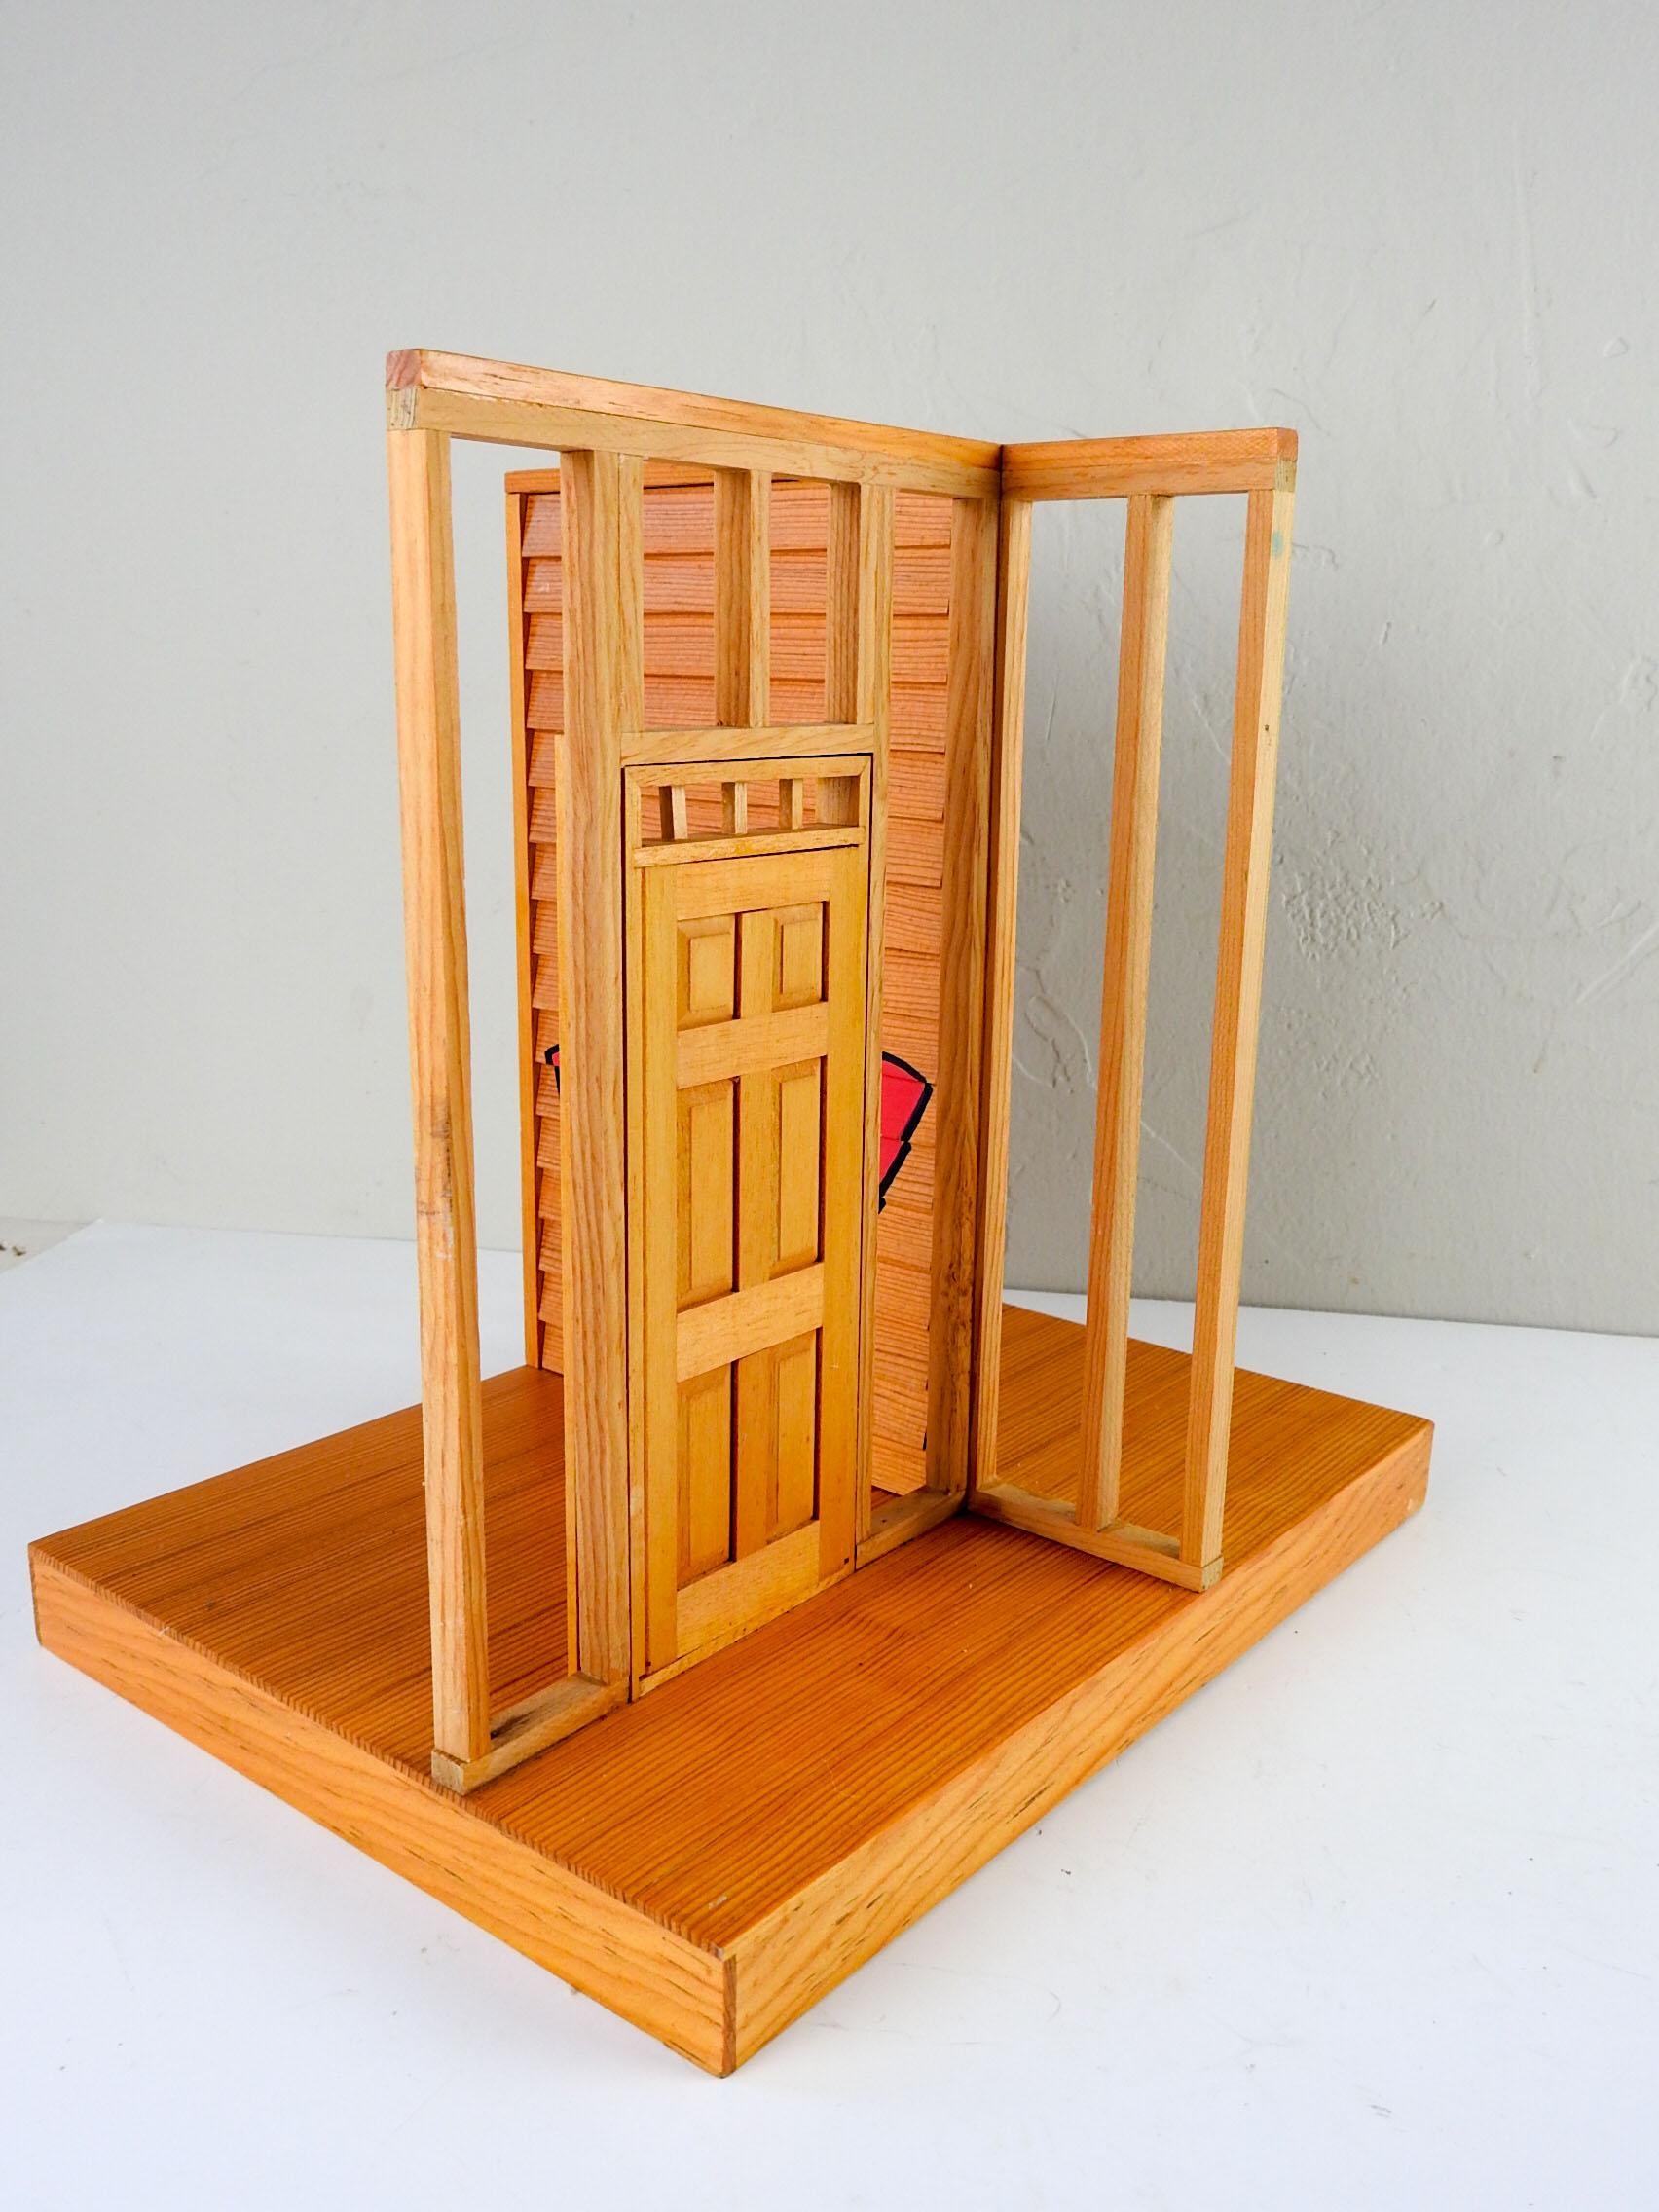 Intricate sculpture in wood of a deconstructed house by Eric C. Weller (20th century) Texas. Graffiti signed ECW in pink and black, working window with plexiglass panes, working door. The craftsmanship is excellent, very well built and beautiful